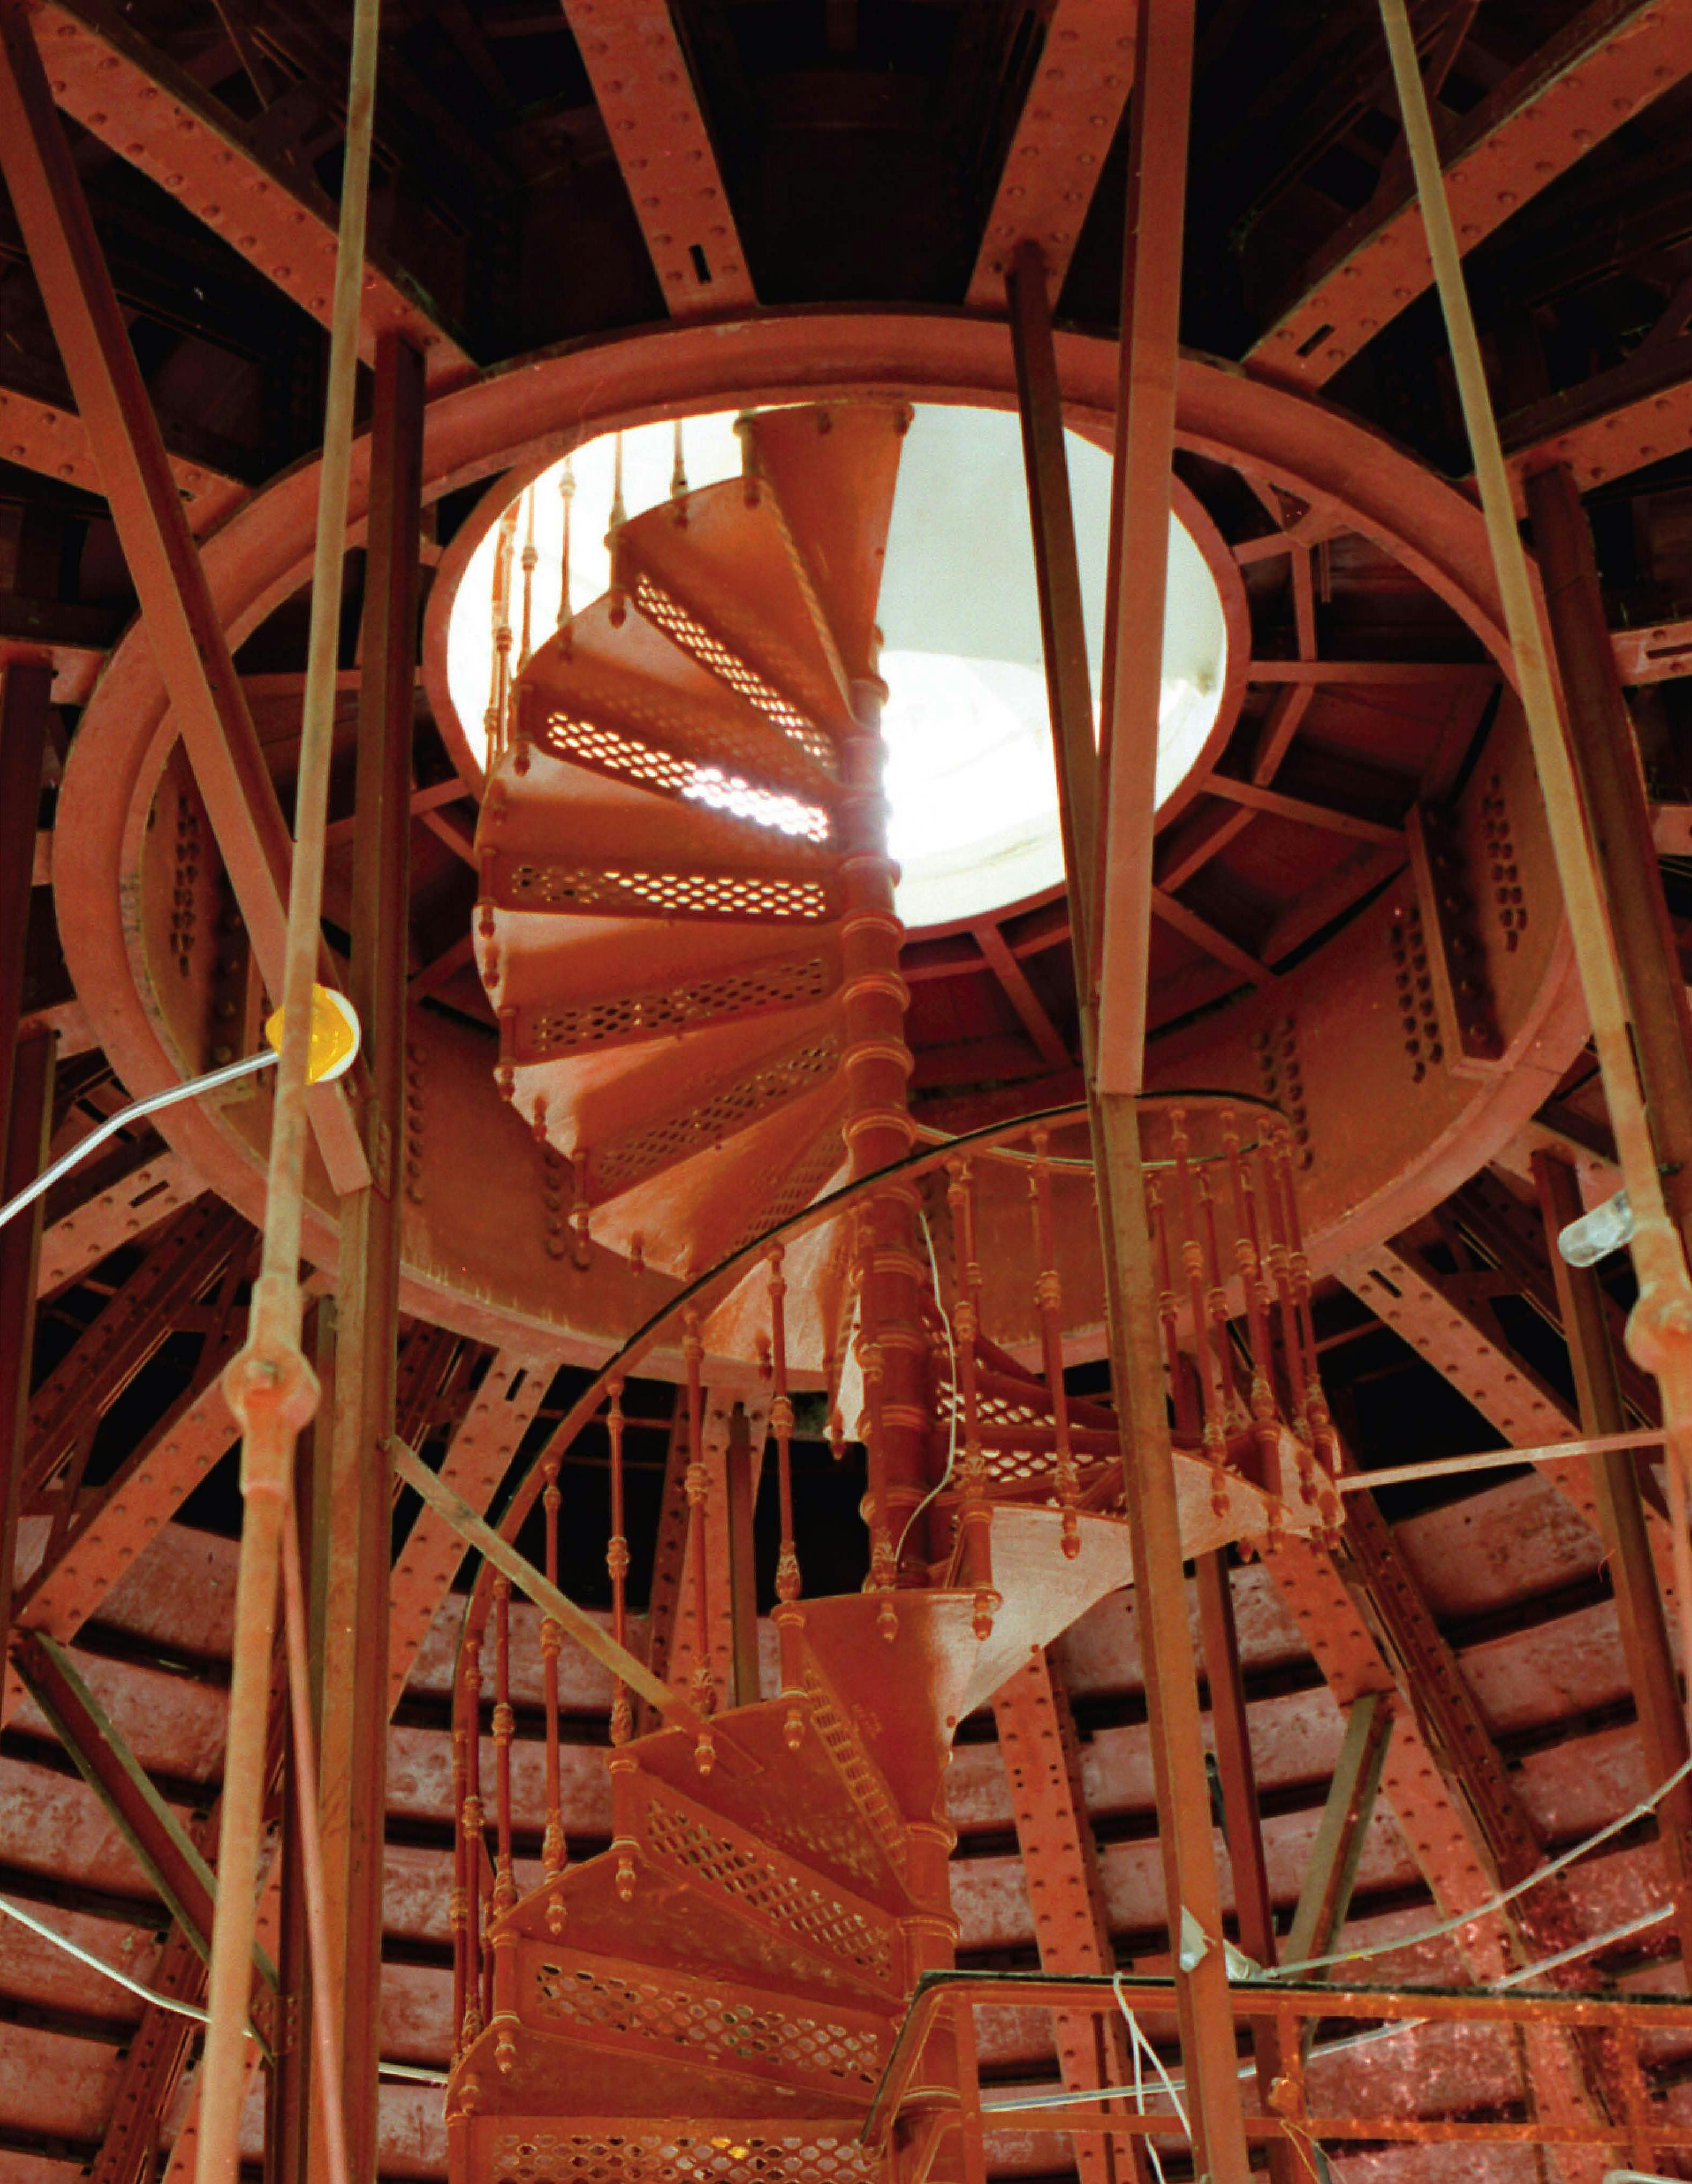 One of several original spiral staircases that were preserved in the Capitol restoration a decade ago.